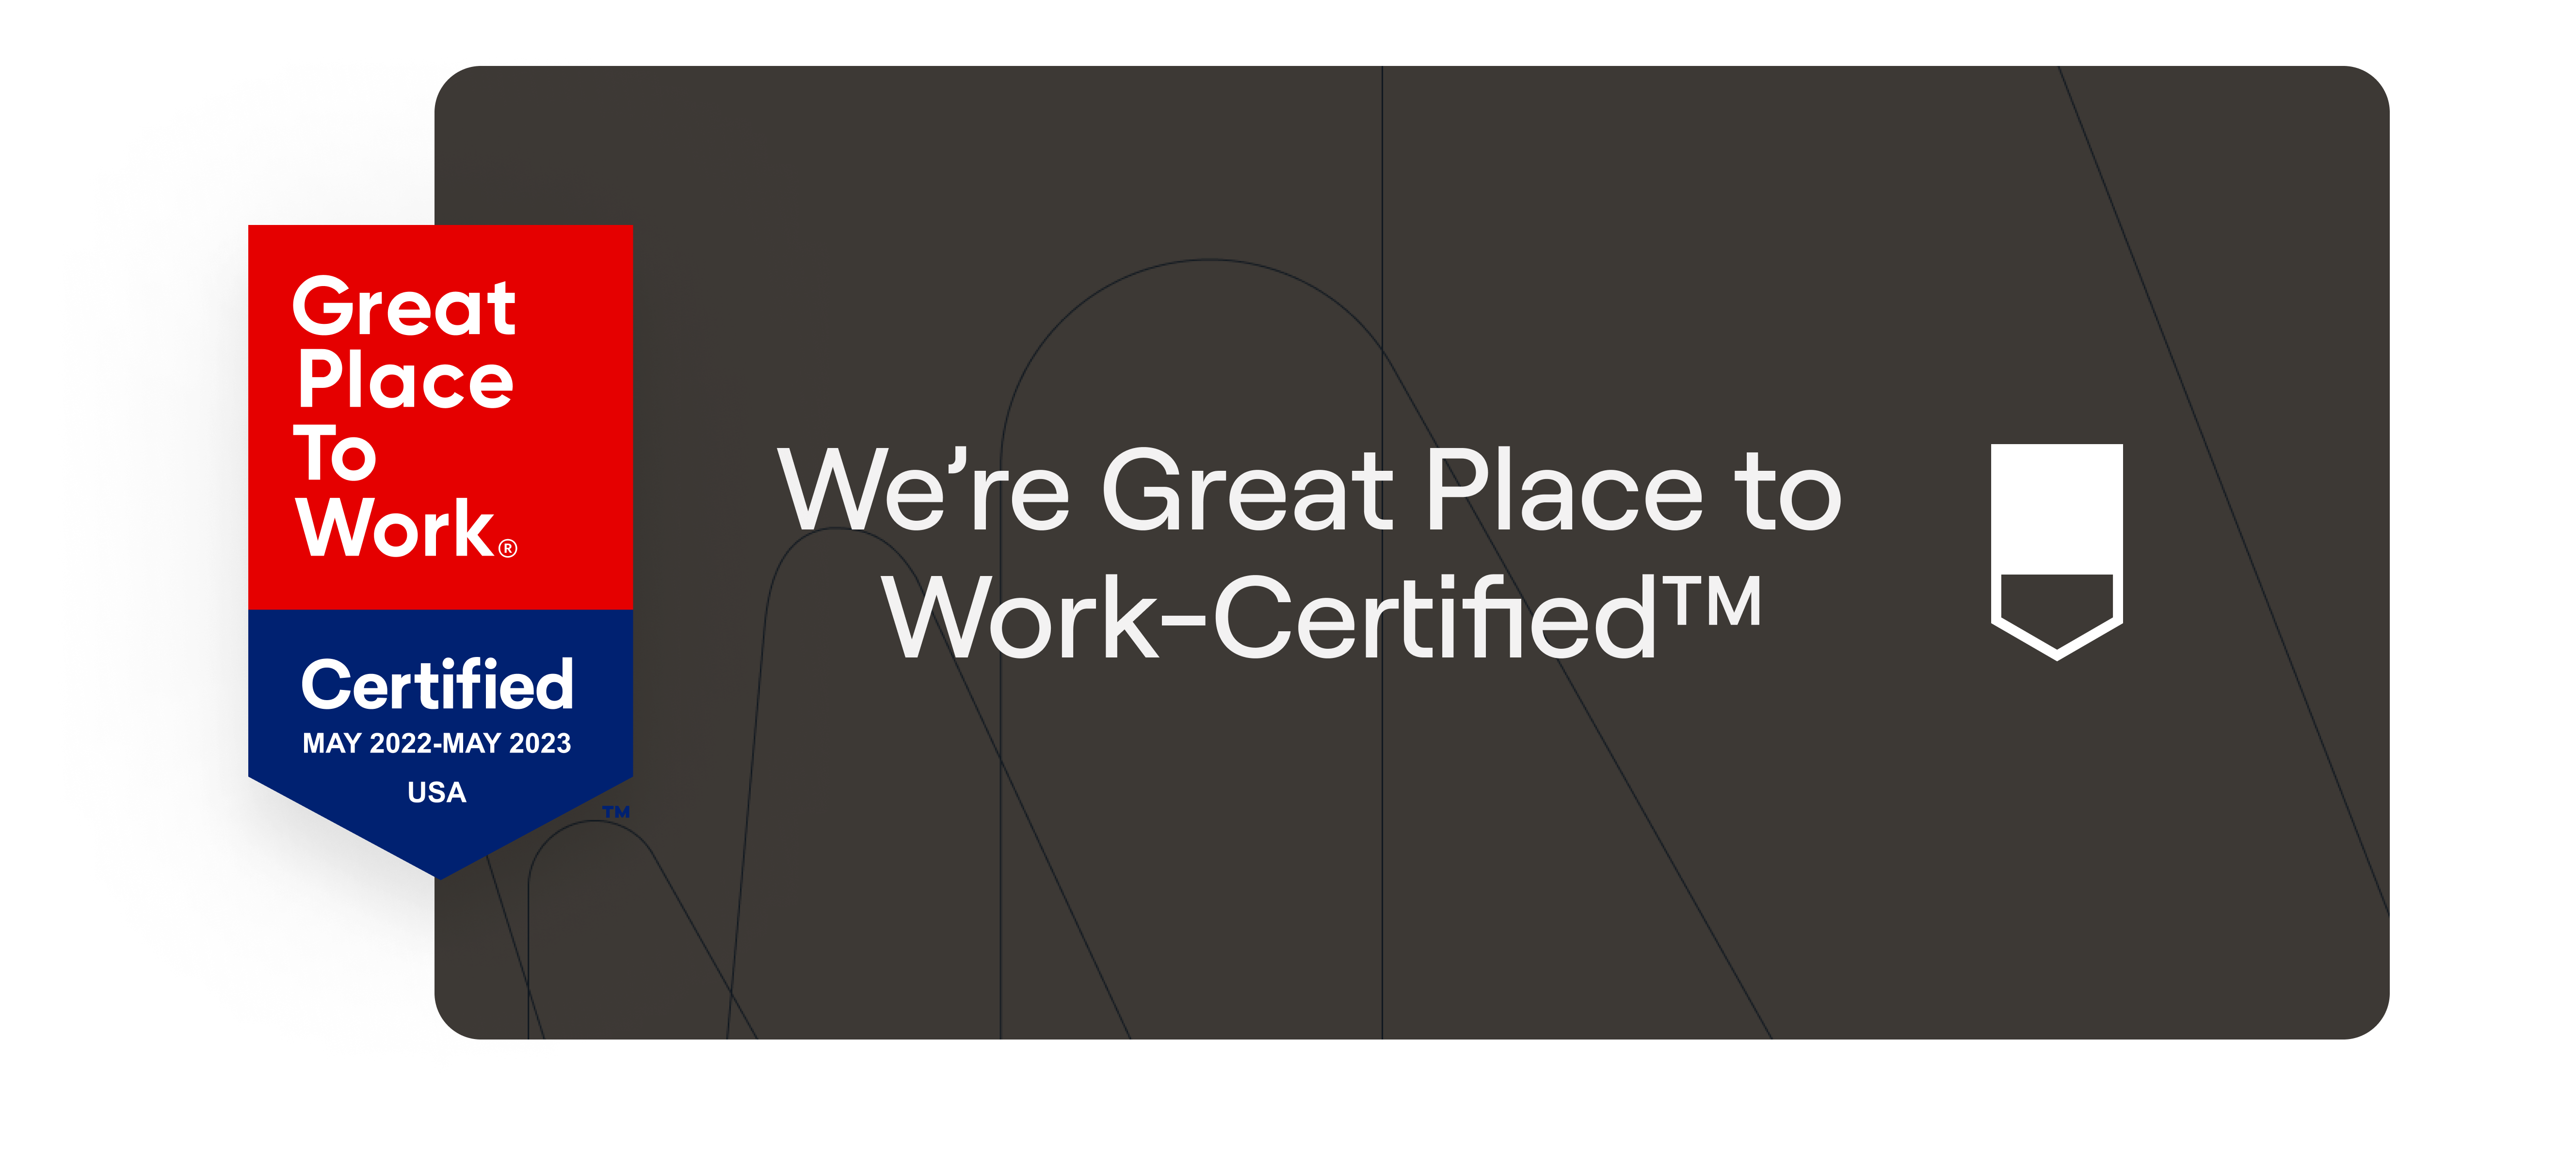 We're Great Place to Work-Certified. May 2022 - May 2023